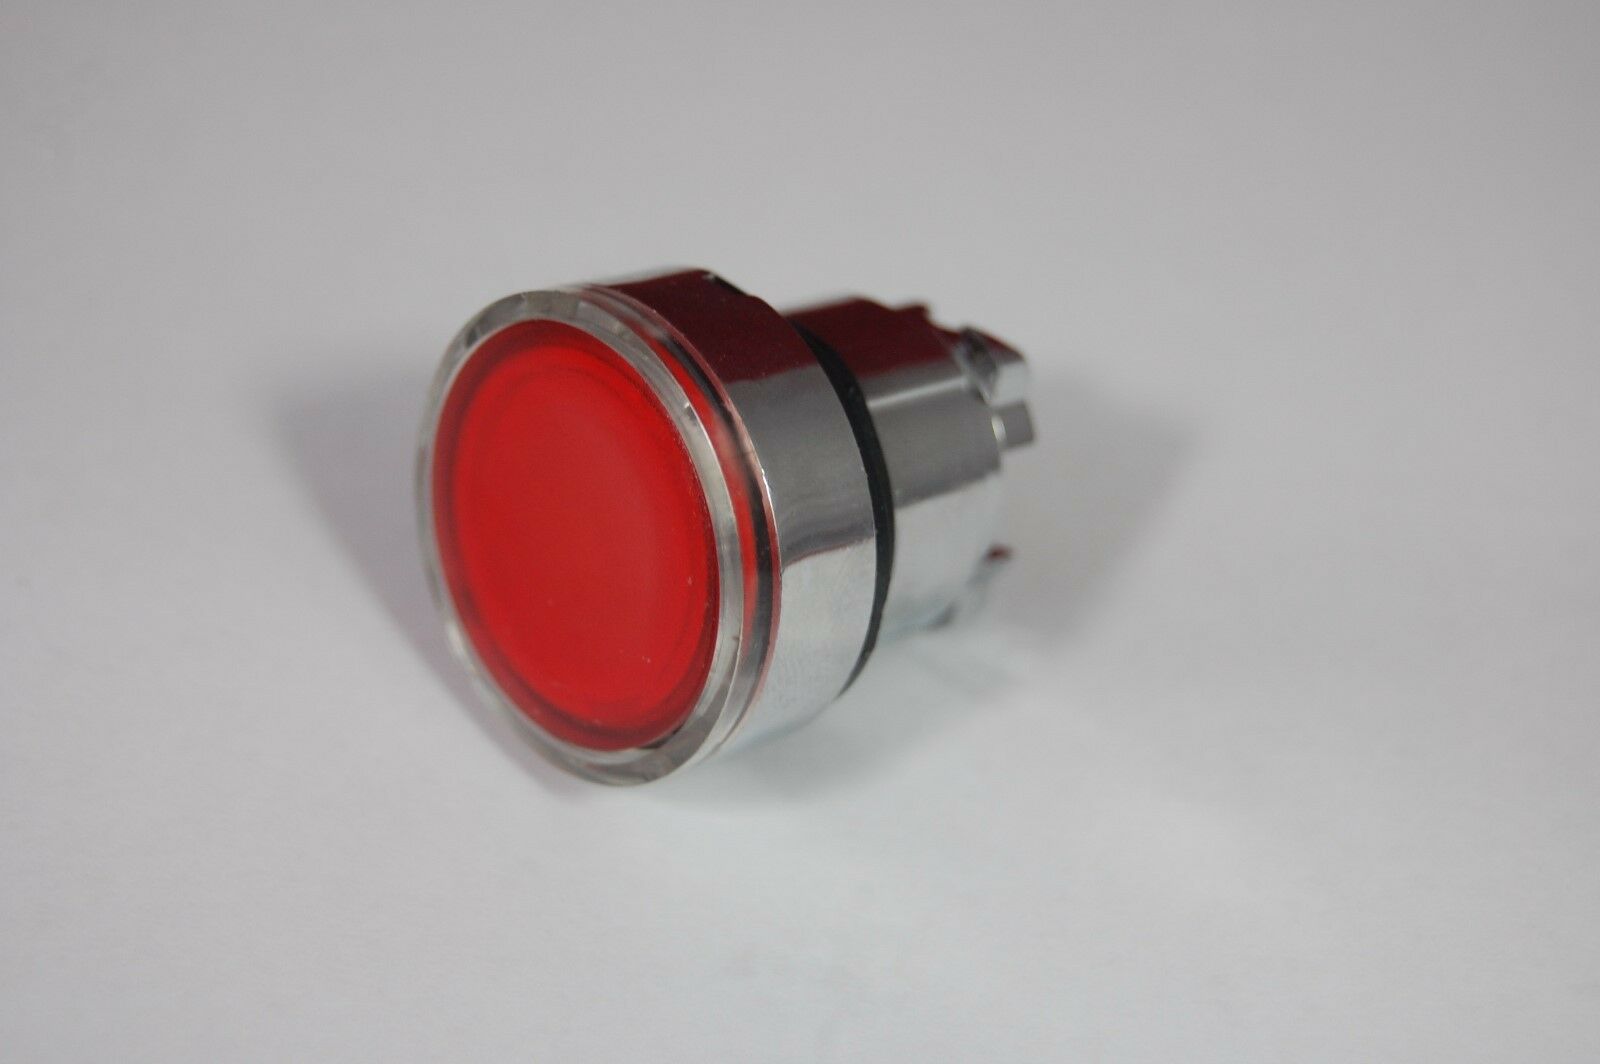 2PC 22MM PUSHBUTTON SWITCH HEAD FITS ZB4 BW343 RED Head XB4BW Parts